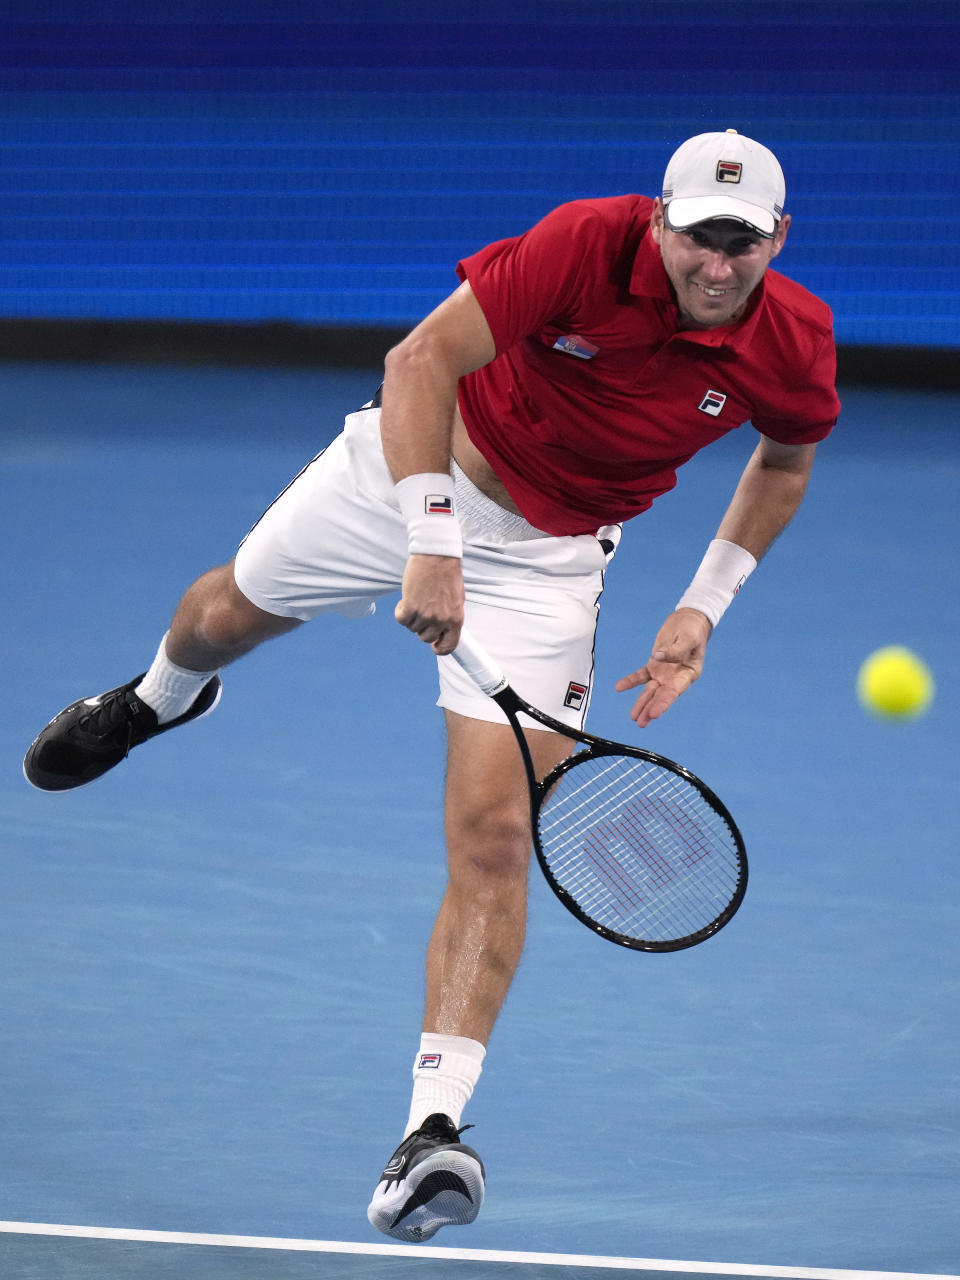 Serbia's Dusan Lajovic serves to Norway's Casper Ruud during their match at the ATP Cup tennis tournament in Sydney, Saturday, Jan. 1, 2022. (AP Photo/Rick Rycroft)